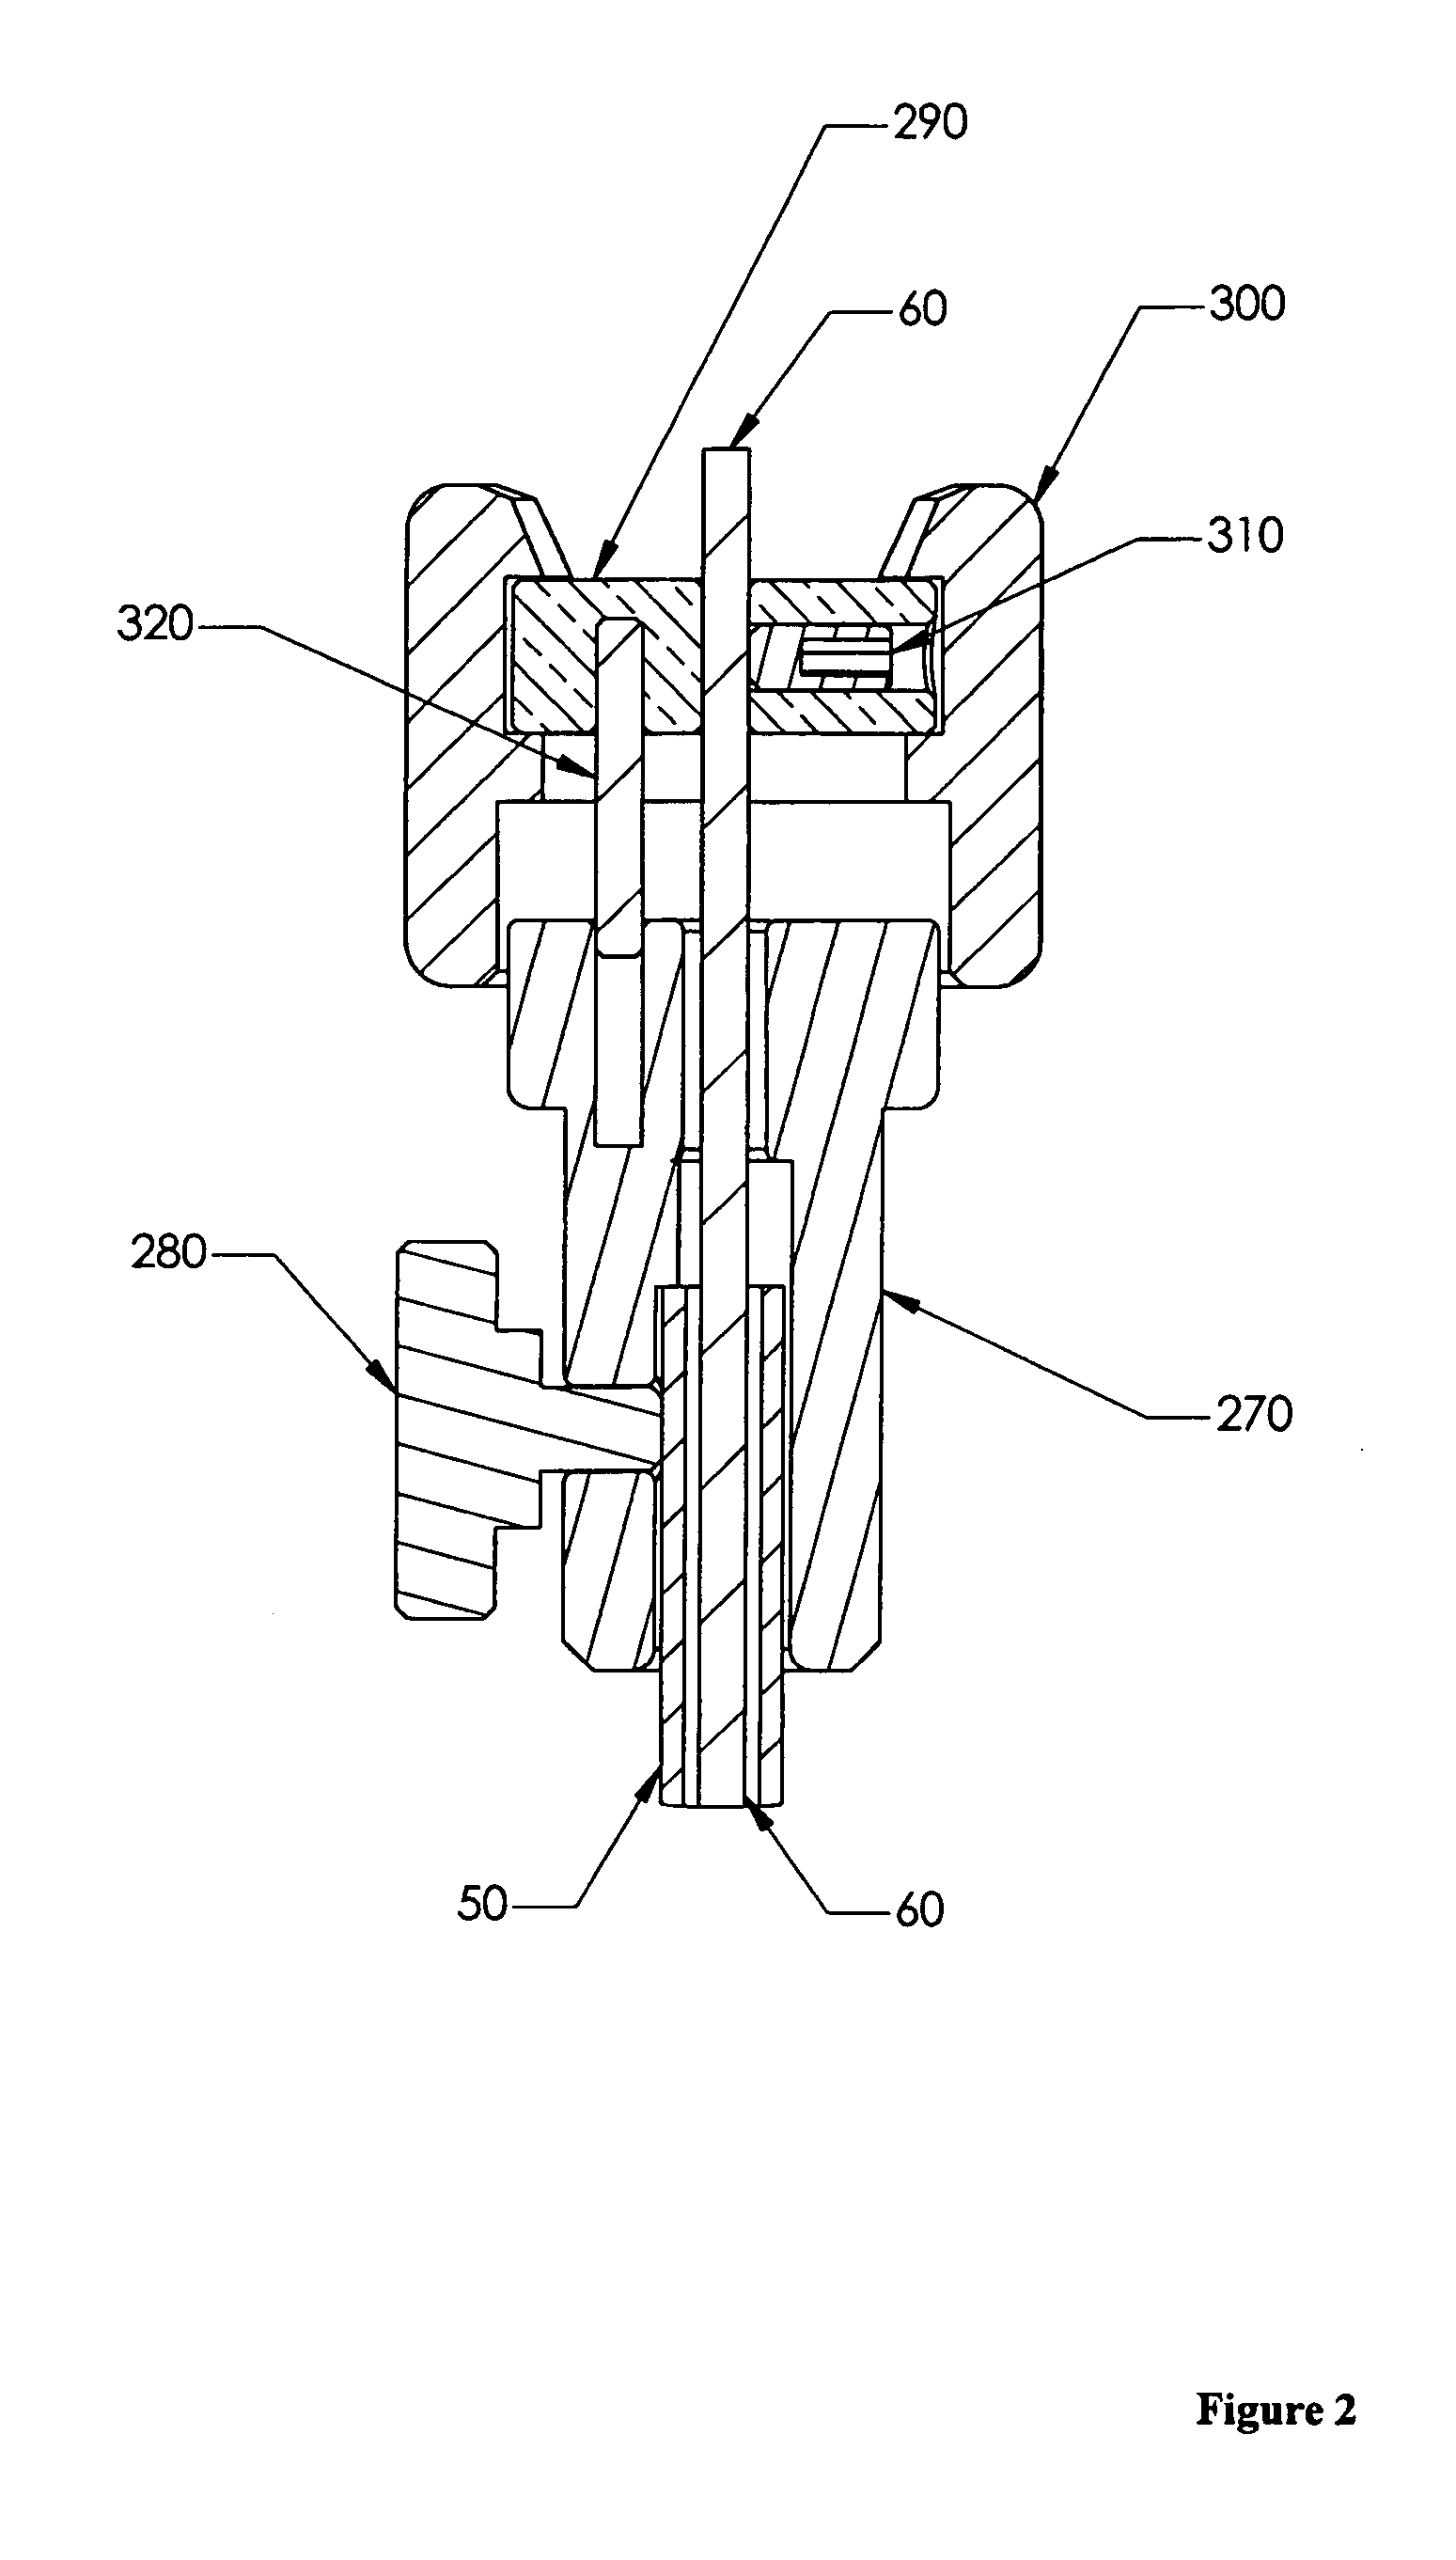 Automated transluminal tissue targeting and anchoring devices and methods